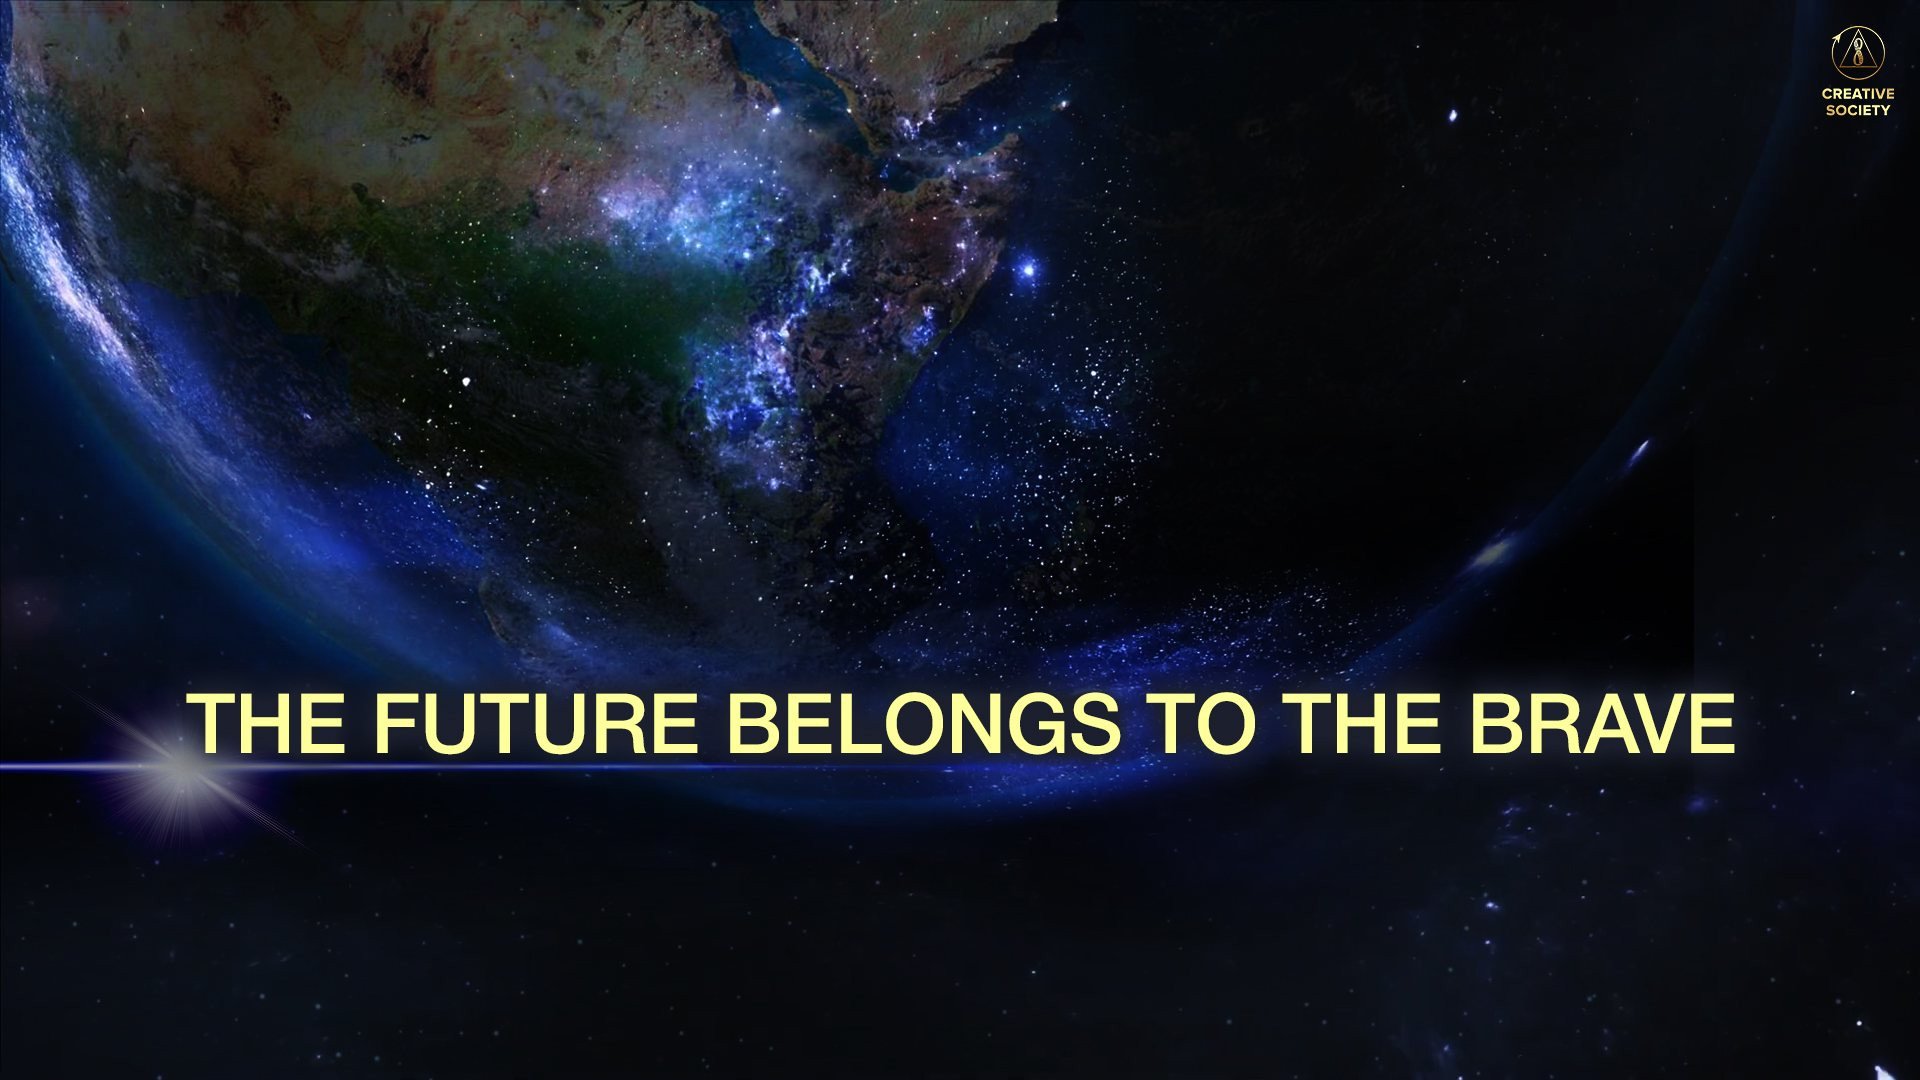 The Choice That Will Change the World. How We Can Save the Future of Humankind